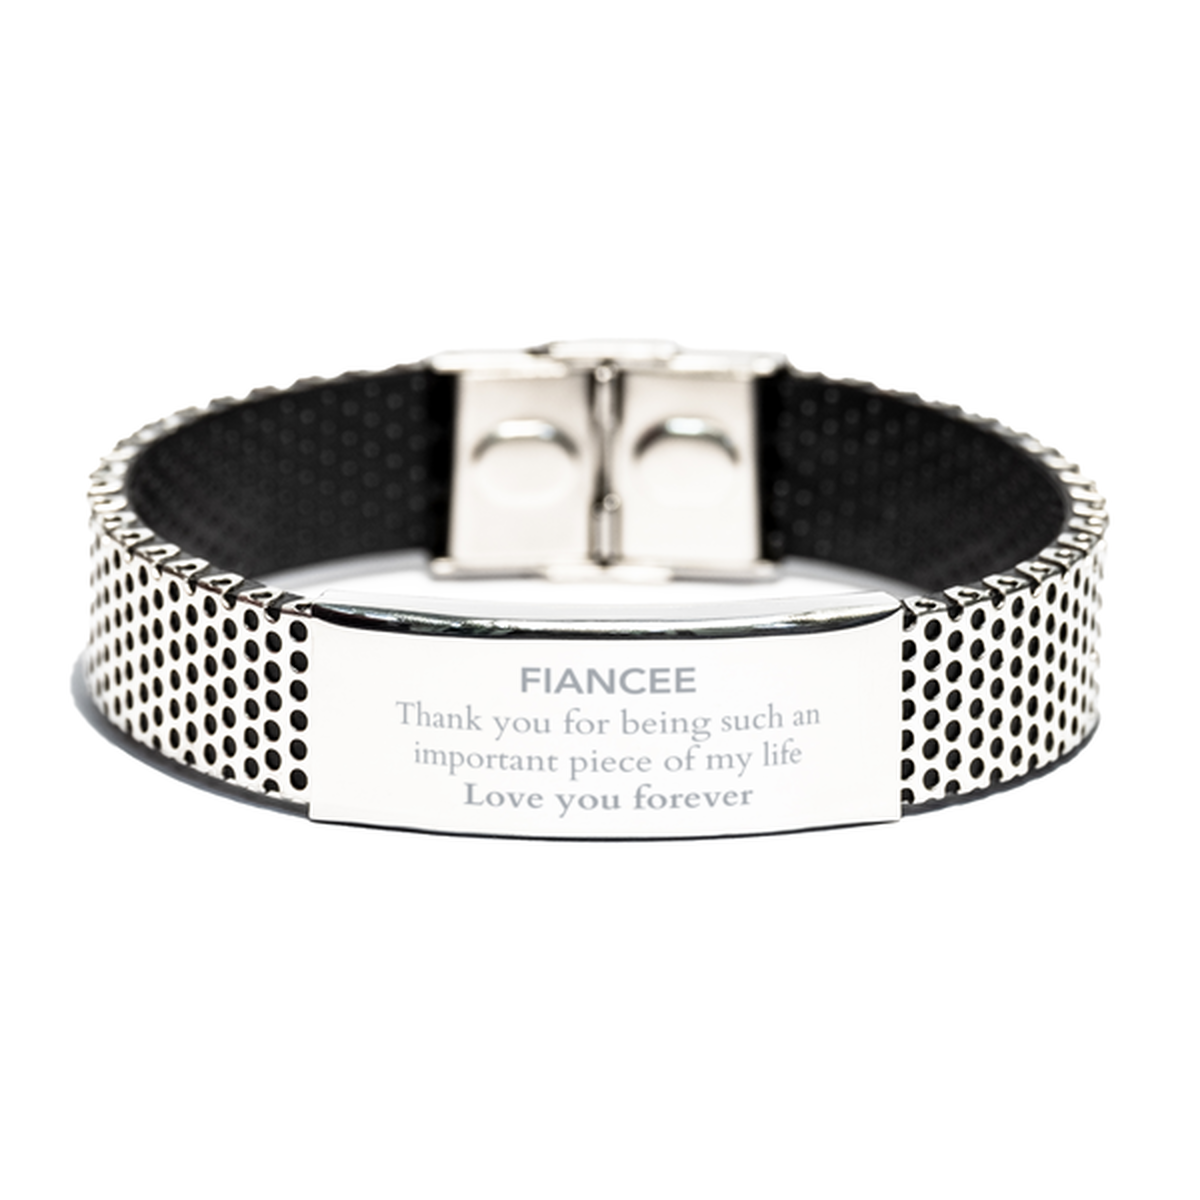 Appropriate Fiancee Stainless Steel Bracelet Epic Birthday Gifts for Fiancee Thank you for being such an important piece of my life Fiancee Christmas Mothers Fathers Day